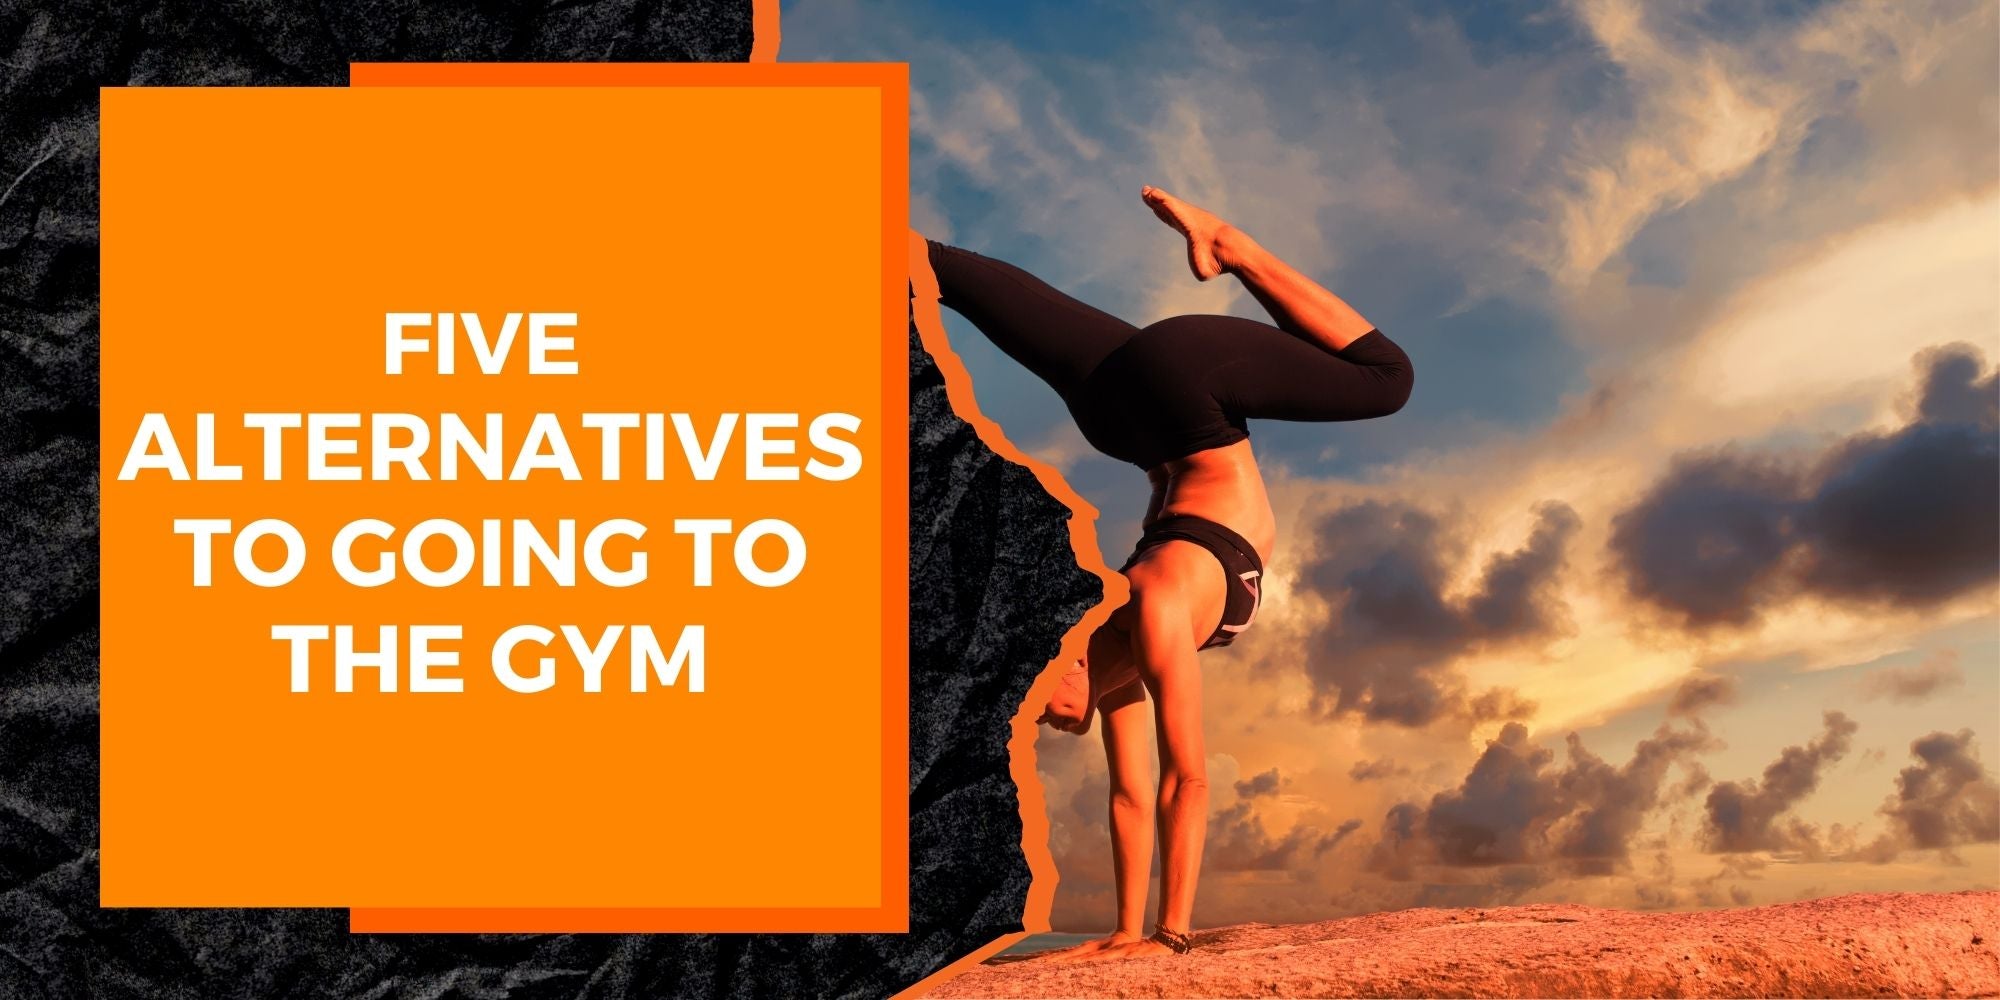 5 Alternatives to Going to the Gym